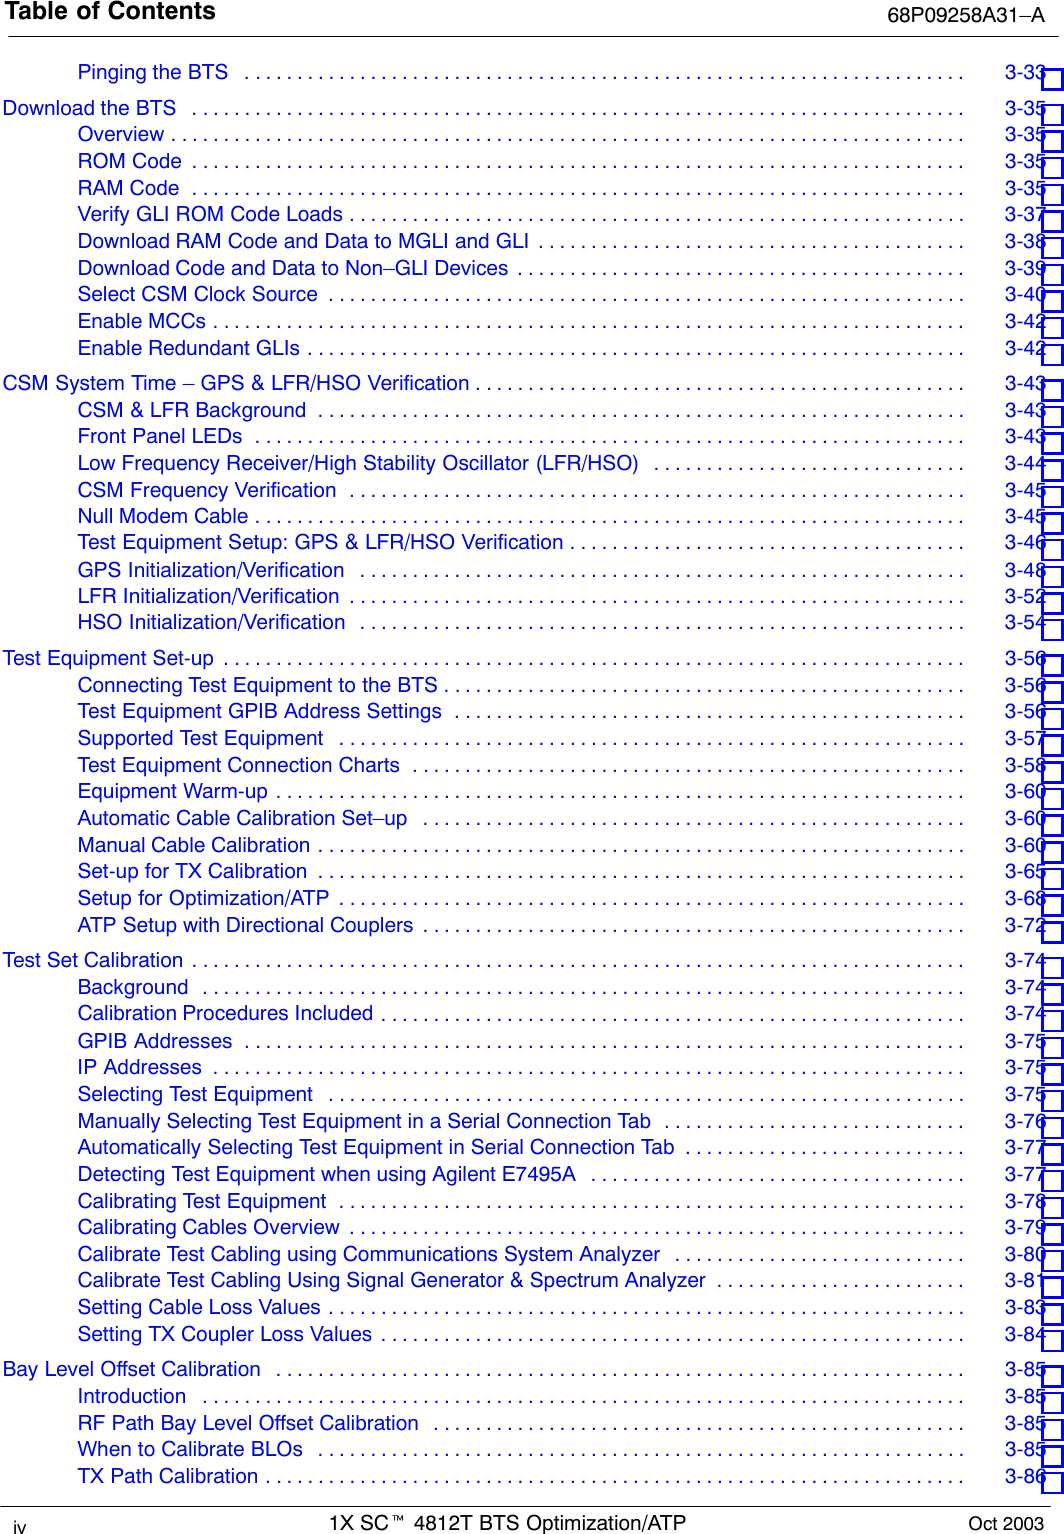 Table of Contents 68P09258A31–A1X SCt 4812T BTS Optimization/ATPiv Oct 2003Pinging the BTS 3-33 . . . . . . . . . . . . . . . . . . . . . . . . . . . . . . . . . . . . . . . . . . . . . . . . . . . . . . . . . . . . . . . . . . . . . Download the BTS 3-35 . . . . . . . . . . . . . . . . . . . . . . . . . . . . . . . . . . . . . . . . . . . . . . . . . . . . . . . . . . . . . . . . . . . . . . . . . . Overview 3-35 . . . . . . . . . . . . . . . . . . . . . . . . . . . . . . . . . . . . . . . . . . . . . . . . . . . . . . . . . . . . . . . . . . . . . . . . . . . . ROM Code 3-35 . . . . . . . . . . . . . . . . . . . . . . . . . . . . . . . . . . . . . . . . . . . . . . . . . . . . . . . . . . . . . . . . . . . . . . . . . . RAM Code 3-35 . . . . . . . . . . . . . . . . . . . . . . . . . . . . . . . . . . . . . . . . . . . . . . . . . . . . . . . . . . . . . . . . . . . . . . . . . . Verify GLI ROM Code Loads 3-37 . . . . . . . . . . . . . . . . . . . . . . . . . . . . . . . . . . . . . . . . . . . . . . . . . . . . . . . . . . . Download RAM Code and Data to MGLI and GLI 3-38 . . . . . . . . . . . . . . . . . . . . . . . . . . . . . . . . . . . . . . . . . Download Code and Data to Non–GLI Devices 3-39 . . . . . . . . . . . . . . . . . . . . . . . . . . . . . . . . . . . . . . . . . . . Select CSM Clock Source 3-40 . . . . . . . . . . . . . . . . . . . . . . . . . . . . . . . . . . . . . . . . . . . . . . . . . . . . . . . . . . . . . Enable MCCs 3-42 . . . . . . . . . . . . . . . . . . . . . . . . . . . . . . . . . . . . . . . . . . . . . . . . . . . . . . . . . . . . . . . . . . . . . . . . Enable Redundant GLIs 3-42 . . . . . . . . . . . . . . . . . . . . . . . . . . . . . . . . . . . . . . . . . . . . . . . . . . . . . . . . . . . . . . . CSM System Time – GPS &amp; LFR/HSO Verification 3-43 . . . . . . . . . . . . . . . . . . . . . . . . . . . . . . . . . . . . . . . . . . . . . . . CSM &amp; LFR Background 3-43 . . . . . . . . . . . . . . . . . . . . . . . . . . . . . . . . . . . . . . . . . . . . . . . . . . . . . . . . . . . . . . Front Panel LEDs 3-43 . . . . . . . . . . . . . . . . . . . . . . . . . . . . . . . . . . . . . . . . . . . . . . . . . . . . . . . . . . . . . . . . . . . . Low Frequency Receiver/High Stability Oscillator (LFR/HSO) 3-44 . . . . . . . . . . . . . . . . . . . . . . . . . . . . . . CSM Frequency Verification 3-45 . . . . . . . . . . . . . . . . . . . . . . . . . . . . . . . . . . . . . . . . . . . . . . . . . . . . . . . . . . . Null Modem Cable 3-45 . . . . . . . . . . . . . . . . . . . . . . . . . . . . . . . . . . . . . . . . . . . . . . . . . . . . . . . . . . . . . . . . . . . . Test Equipment Setup: GPS &amp; LFR/HSO Verification 3-46 . . . . . . . . . . . . . . . . . . . . . . . . . . . . . . . . . . . . . . GPS Initialization/Verification 3-48 . . . . . . . . . . . . . . . . . . . . . . . . . . . . . . . . . . . . . . . . . . . . . . . . . . . . . . . . . . LFR Initialization/Verification 3-52 . . . . . . . . . . . . . . . . . . . . . . . . . . . . . . . . . . . . . . . . . . . . . . . . . . . . . . . . . . . HSO Initialization/Verification 3-54 . . . . . . . . . . . . . . . . . . . . . . . . . . . . . . . . . . . . . . . . . . . . . . . . . . . . . . . . . . Test Equipment Set-up 3-56 . . . . . . . . . . . . . . . . . . . . . . . . . . . . . . . . . . . . . . . . . . . . . . . . . . . . . . . . . . . . . . . . . . . . . . . Connecting Test Equipment to the BTS 3-56 . . . . . . . . . . . . . . . . . . . . . . . . . . . . . . . . . . . . . . . . . . . . . . . . . . Test Equipment GPIB Address Settings 3-56 . . . . . . . . . . . . . . . . . . . . . . . . . . . . . . . . . . . . . . . . . . . . . . . . . Supported Test Equipment 3-57 . . . . . . . . . . . . . . . . . . . . . . . . . . . . . . . . . . . . . . . . . . . . . . . . . . . . . . . . . . . . Test Equipment Connection Charts 3-58 . . . . . . . . . . . . . . . . . . . . . . . . . . . . . . . . . . . . . . . . . . . . . . . . . . . . . Equipment Warm-up 3-60 . . . . . . . . . . . . . . . . . . . . . . . . . . . . . . . . . . . . . . . . . . . . . . . . . . . . . . . . . . . . . . . . . . Automatic Cable Calibration Set–up 3-60 . . . . . . . . . . . . . . . . . . . . . . . . . . . . . . . . . . . . . . . . . . . . . . . . . . . . Manual Cable Calibration 3-60 . . . . . . . . . . . . . . . . . . . . . . . . . . . . . . . . . . . . . . . . . . . . . . . . . . . . . . . . . . . . . . Set-up for TX Calibration 3-65 . . . . . . . . . . . . . . . . . . . . . . . . . . . . . . . . . . . . . . . . . . . . . . . . . . . . . . . . . . . . . . Setup for Optimization/ATP 3-68 . . . . . . . . . . . . . . . . . . . . . . . . . . . . . . . . . . . . . . . . . . . . . . . . . . . . . . . . . . . . ATP Setup with Directional Couplers 3-72 . . . . . . . . . . . . . . . . . . . . . . . . . . . . . . . . . . . . . . . . . . . . . . . . . . . . Test Set Calibration 3-74 . . . . . . . . . . . . . . . . . . . . . . . . . . . . . . . . . . . . . . . . . . . . . . . . . . . . . . . . . . . . . . . . . . . . . . . . . . Background 3-74 . . . . . . . . . . . . . . . . . . . . . . . . . . . . . . . . . . . . . . . . . . . . . . . . . . . . . . . . . . . . . . . . . . . . . . . . . Calibration Procedures Included 3-74 . . . . . . . . . . . . . . . . . . . . . . . . . . . . . . . . . . . . . . . . . . . . . . . . . . . . . . . . GPIB Addresses 3-75 . . . . . . . . . . . . . . . . . . . . . . . . . . . . . . . . . . . . . . . . . . . . . . . . . . . . . . . . . . . . . . . . . . . . . IP Addresses 3-75 . . . . . . . . . . . . . . . . . . . . . . . . . . . . . . . . . . . . . . . . . . . . . . . . . . . . . . . . . . . . . . . . . . . . . . . . Selecting Test Equipment 3-75 . . . . . . . . . . . . . . . . . . . . . . . . . . . . . . . . . . . . . . . . . . . . . . . . . . . . . . . . . . . . . Manually Selecting Test Equipment in a Serial Connection Tab 3-76 . . . . . . . . . . . . . . . . . . . . . . . . . . . . . Automatically Selecting Test Equipment in Serial Connection Tab 3-77 . . . . . . . . . . . . . . . . . . . . . . . . . . . Detecting Test Equipment when using Agilent E7495A 3-77 . . . . . . . . . . . . . . . . . . . . . . . . . . . . . . . . . . . . Calibrating Test Equipment 3-78 . . . . . . . . . . . . . . . . . . . . . . . . . . . . . . . . . . . . . . . . . . . . . . . . . . . . . . . . . . . . Calibrating Cables Overview 3-79 . . . . . . . . . . . . . . . . . . . . . . . . . . . . . . . . . . . . . . . . . . . . . . . . . . . . . . . . . . . Calibrate Test Cabling using Communications System Analyzer 3-80 . . . . . . . . . . . . . . . . . . . . . . . . . . . . Calibrate Test Cabling Using Signal Generator &amp; Spectrum Analyzer 3-81 . . . . . . . . . . . . . . . . . . . . . . . . Setting Cable Loss Values 3-83 . . . . . . . . . . . . . . . . . . . . . . . . . . . . . . . . . . . . . . . . . . . . . . . . . . . . . . . . . . . . . Setting TX Coupler Loss Values 3-84 . . . . . . . . . . . . . . . . . . . . . . . . . . . . . . . . . . . . . . . . . . . . . . . . . . . . . . . . Bay Level Offset Calibration 3-85 . . . . . . . . . . . . . . . . . . . . . . . . . . . . . . . . . . . . . . . . . . . . . . . . . . . . . . . . . . . . . . . . . . Introduction 3-85 . . . . . . . . . . . . . . . . . . . . . . . . . . . . . . . . . . . . . . . . . . . . . . . . . . . . . . . . . . . . . . . . . . . . . . . . . RF Path Bay Level Offset Calibration 3-85 . . . . . . . . . . . . . . . . . . . . . . . . . . . . . . . . . . . . . . . . . . . . . . . . . . . When to Calibrate BLOs 3-85 . . . . . . . . . . . . . . . . . . . . . . . . . . . . . . . . . . . . . . . . . . . . . . . . . . . . . . . . . . . . . . TX Path Calibration 3-86 . . . . . . . . . . . . . . . . . . . . . . . . . . . . . . . . . . . . . . . . . . . . . . . . . . . . . . . . . . . . . . . . . . . 